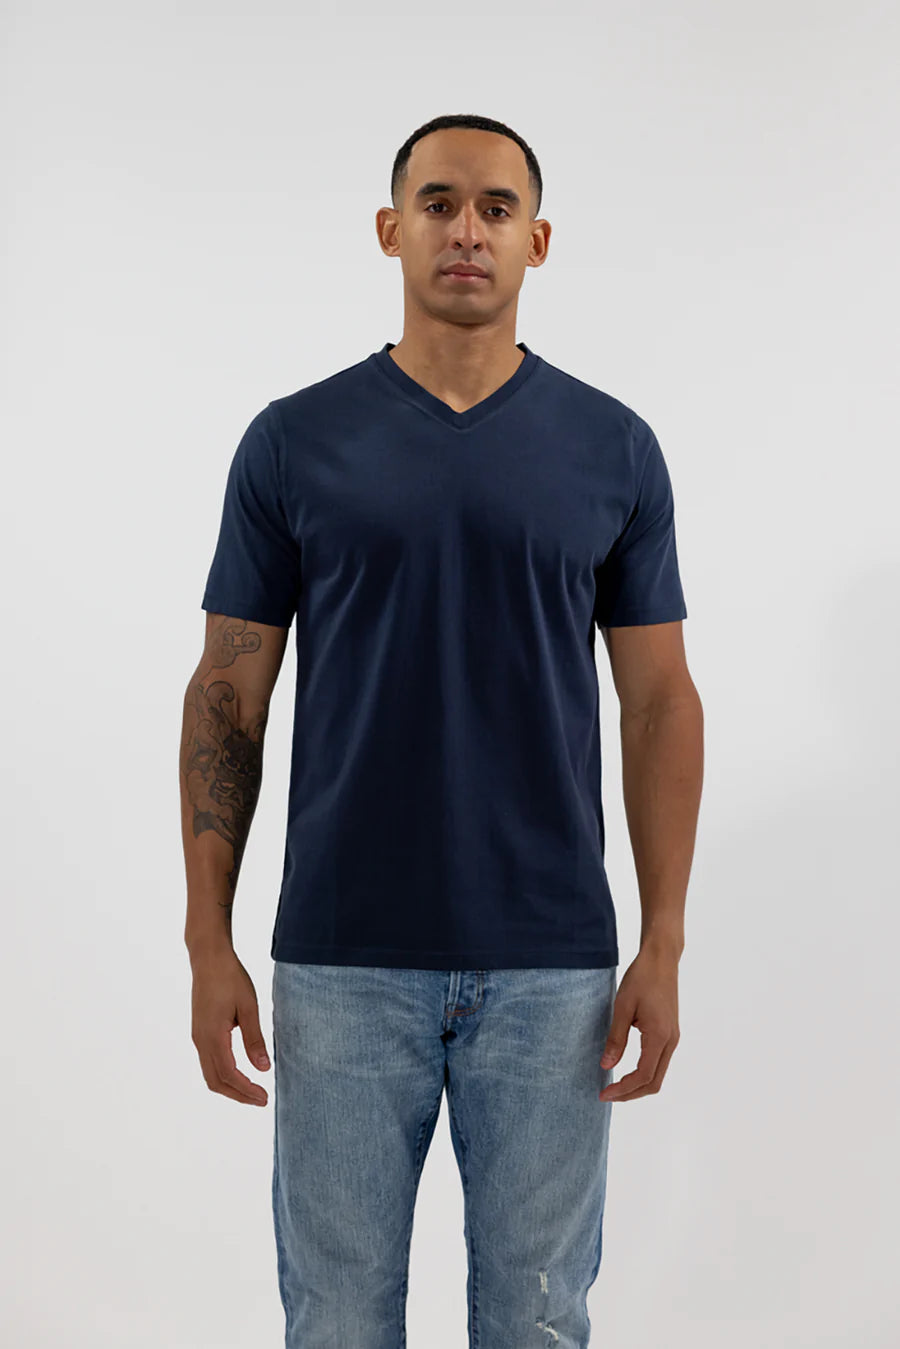 Easy Mondays - Core V Neck Tee-Men's T-Shirts-Navy-S-Yaletown-Vancouver-Surrey-Canada